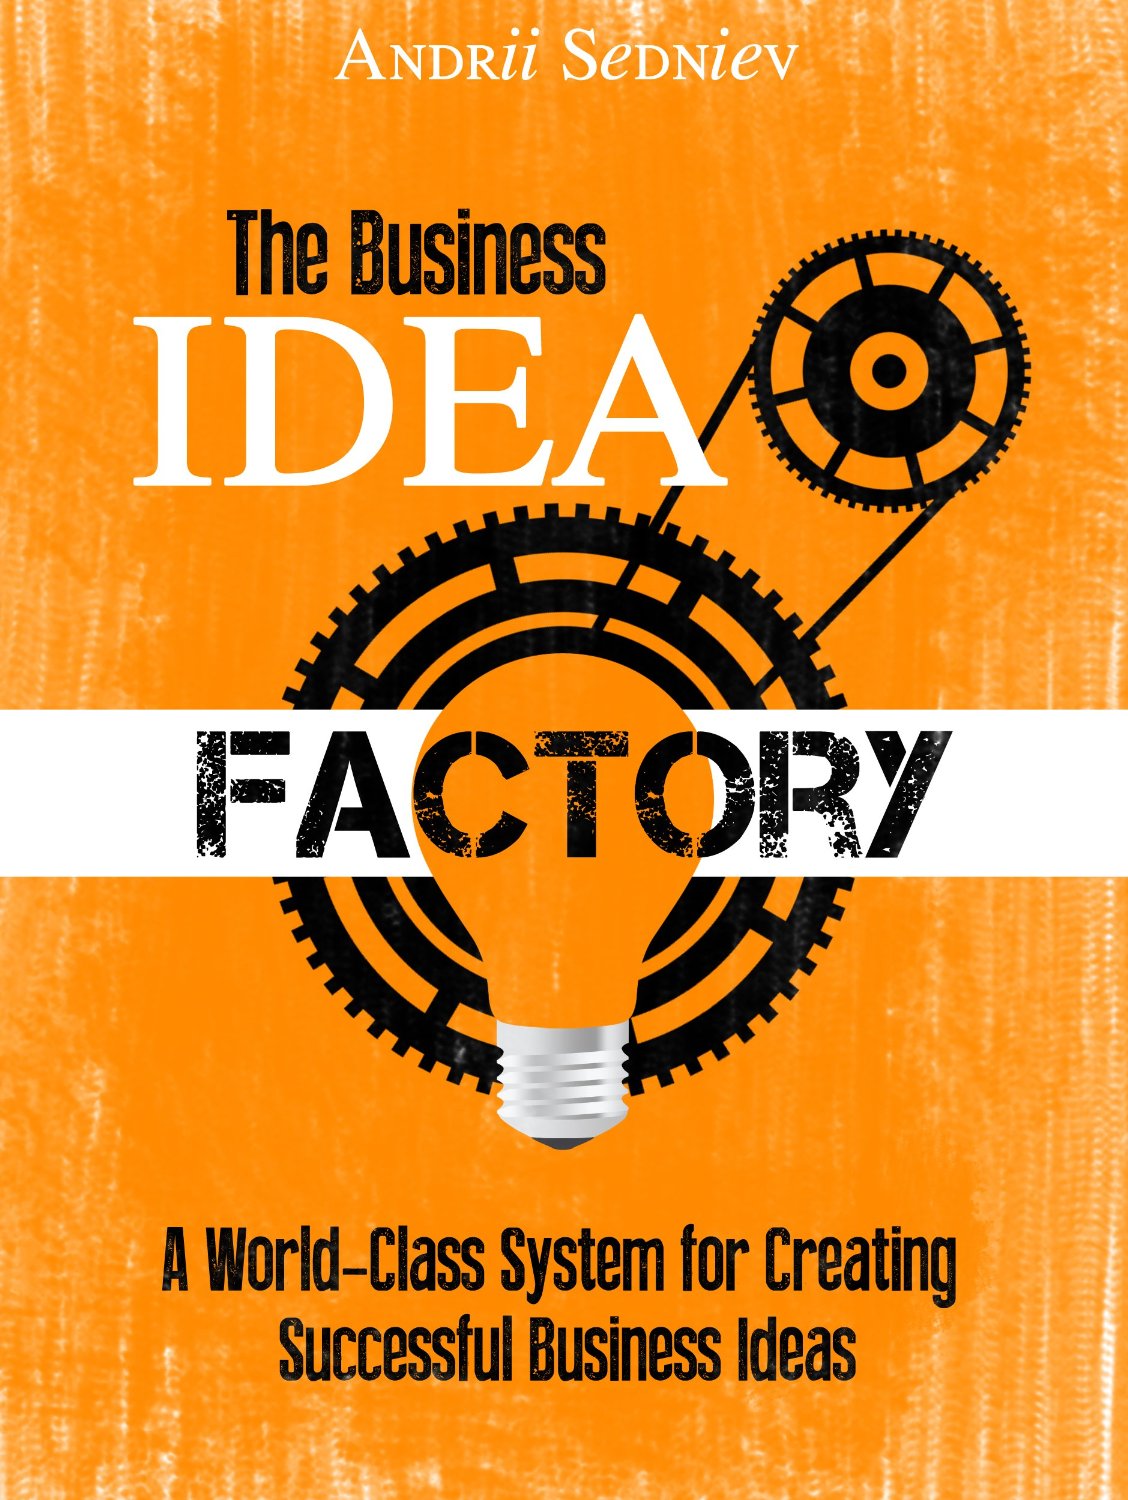 The Business Idea Factory by Andrii Sedniev